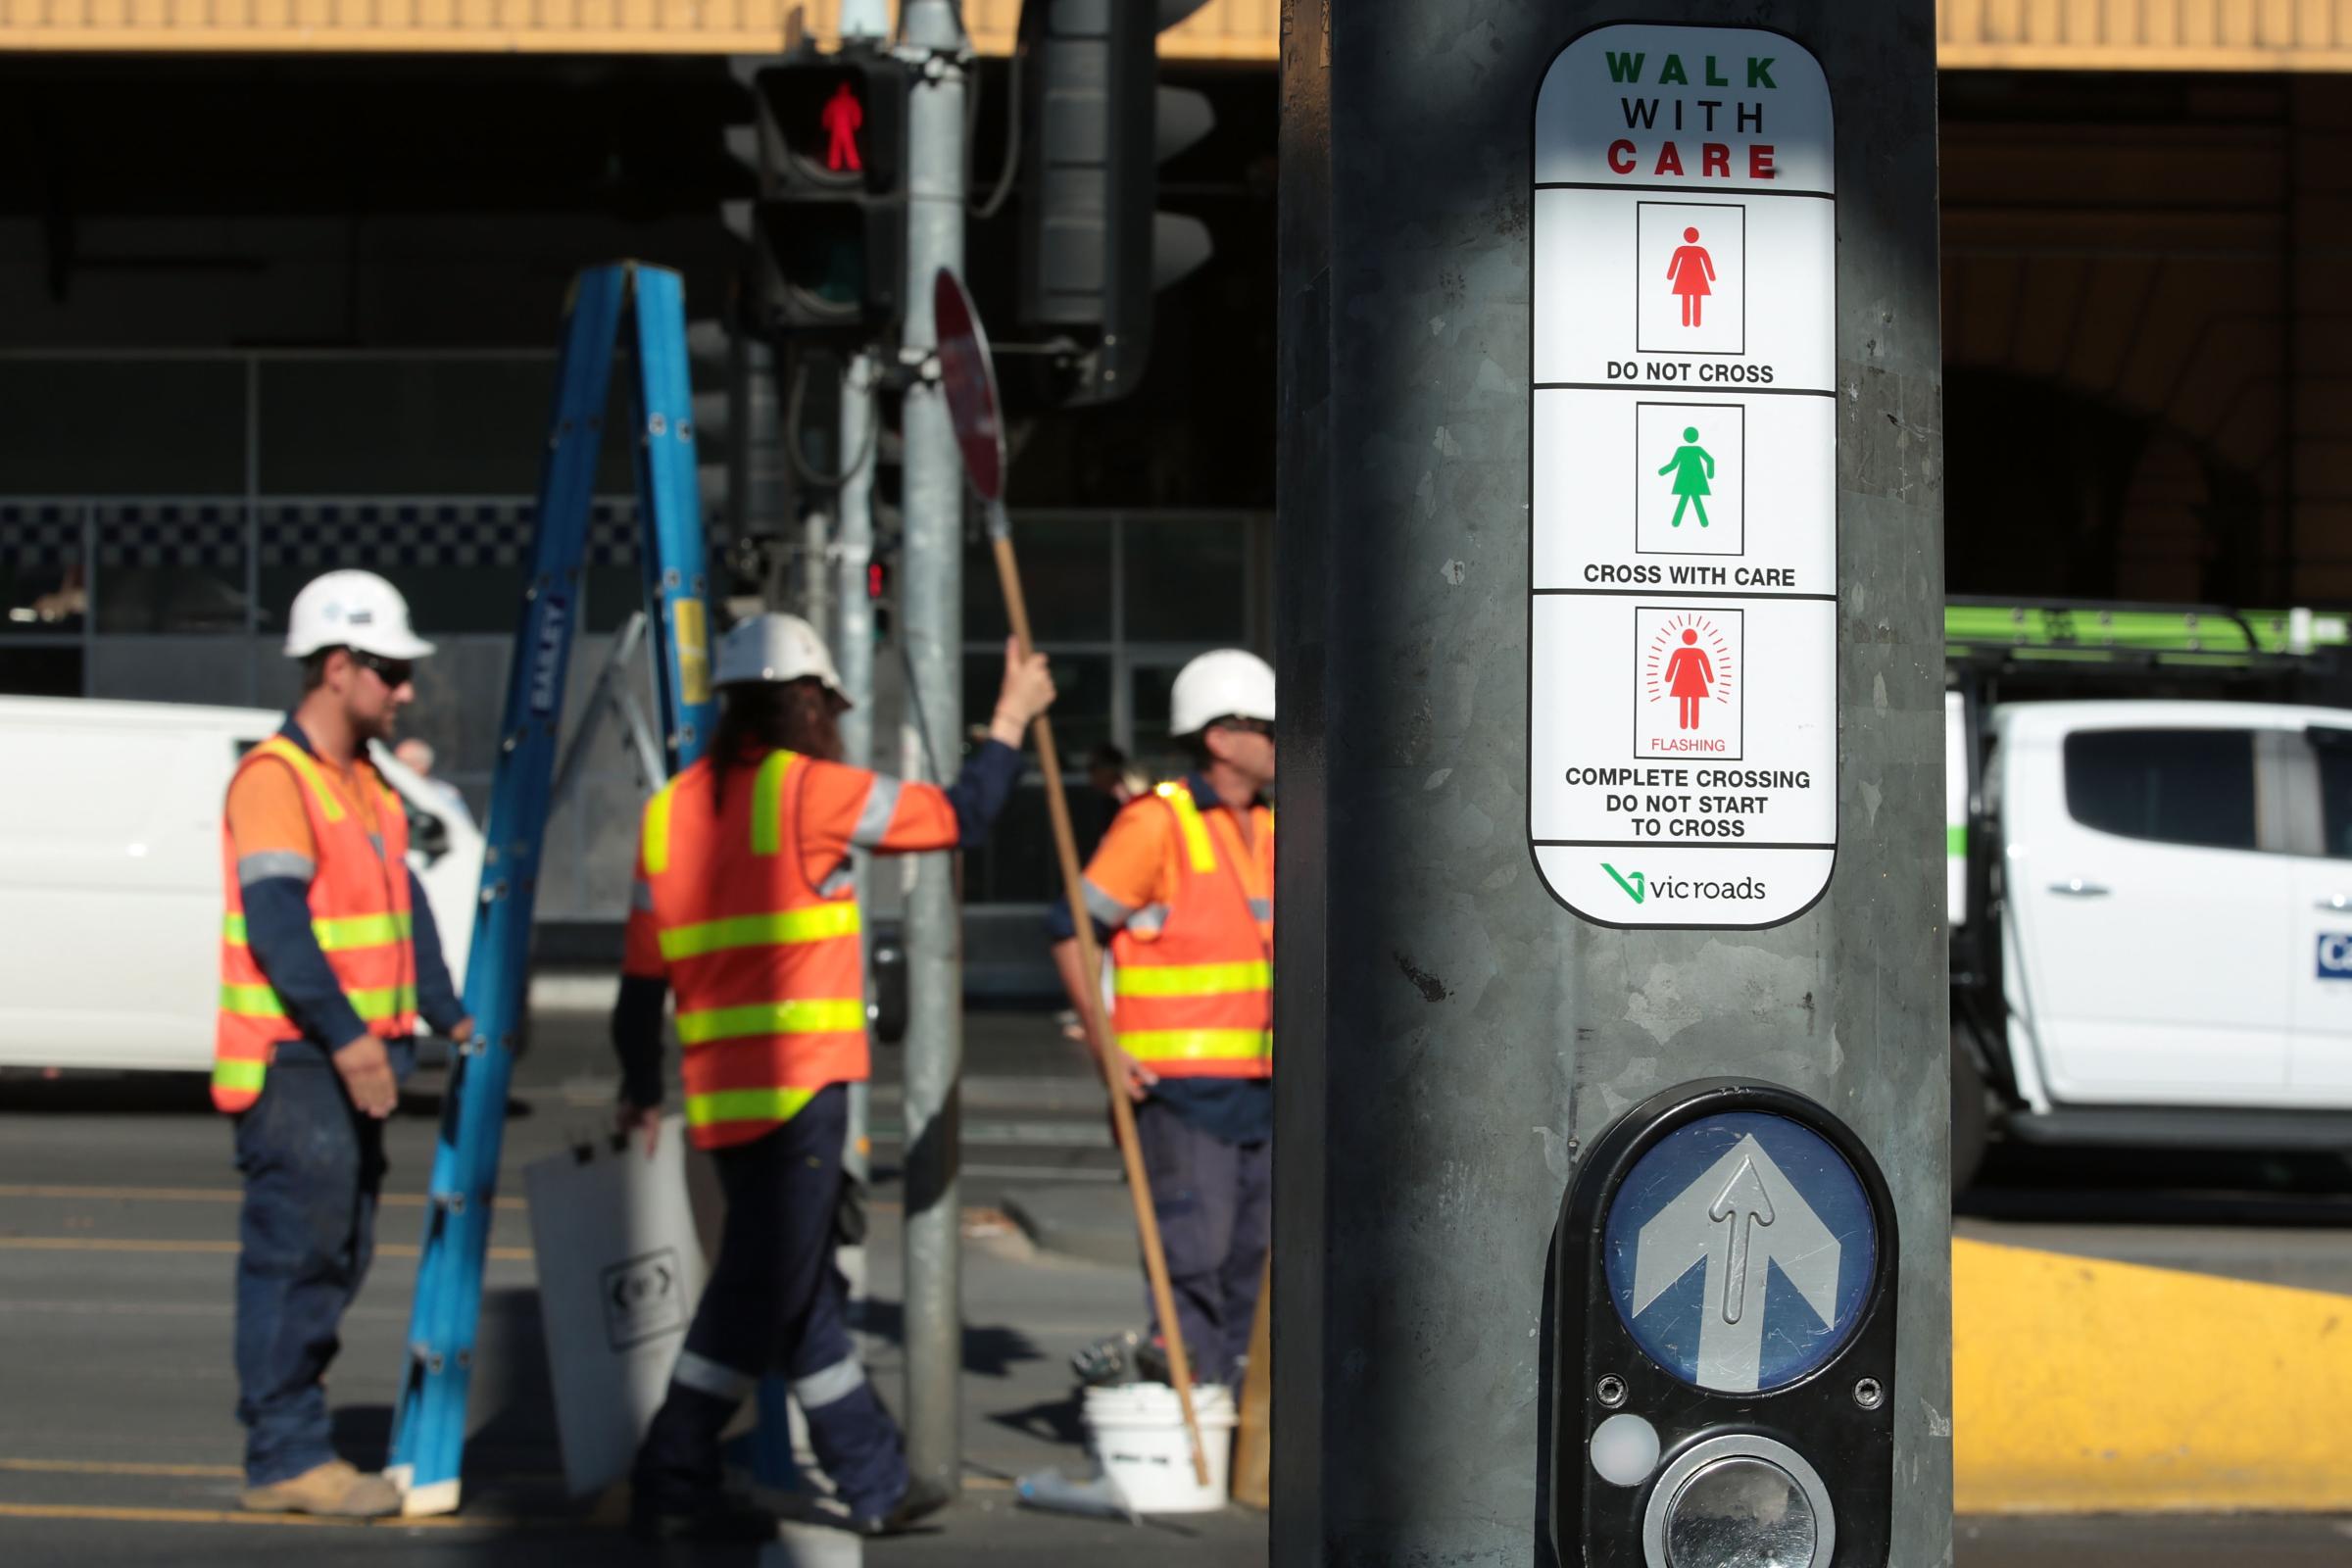 Female Traffic Light Signals Installed In Melbourne CBD In Push For Gender Equality